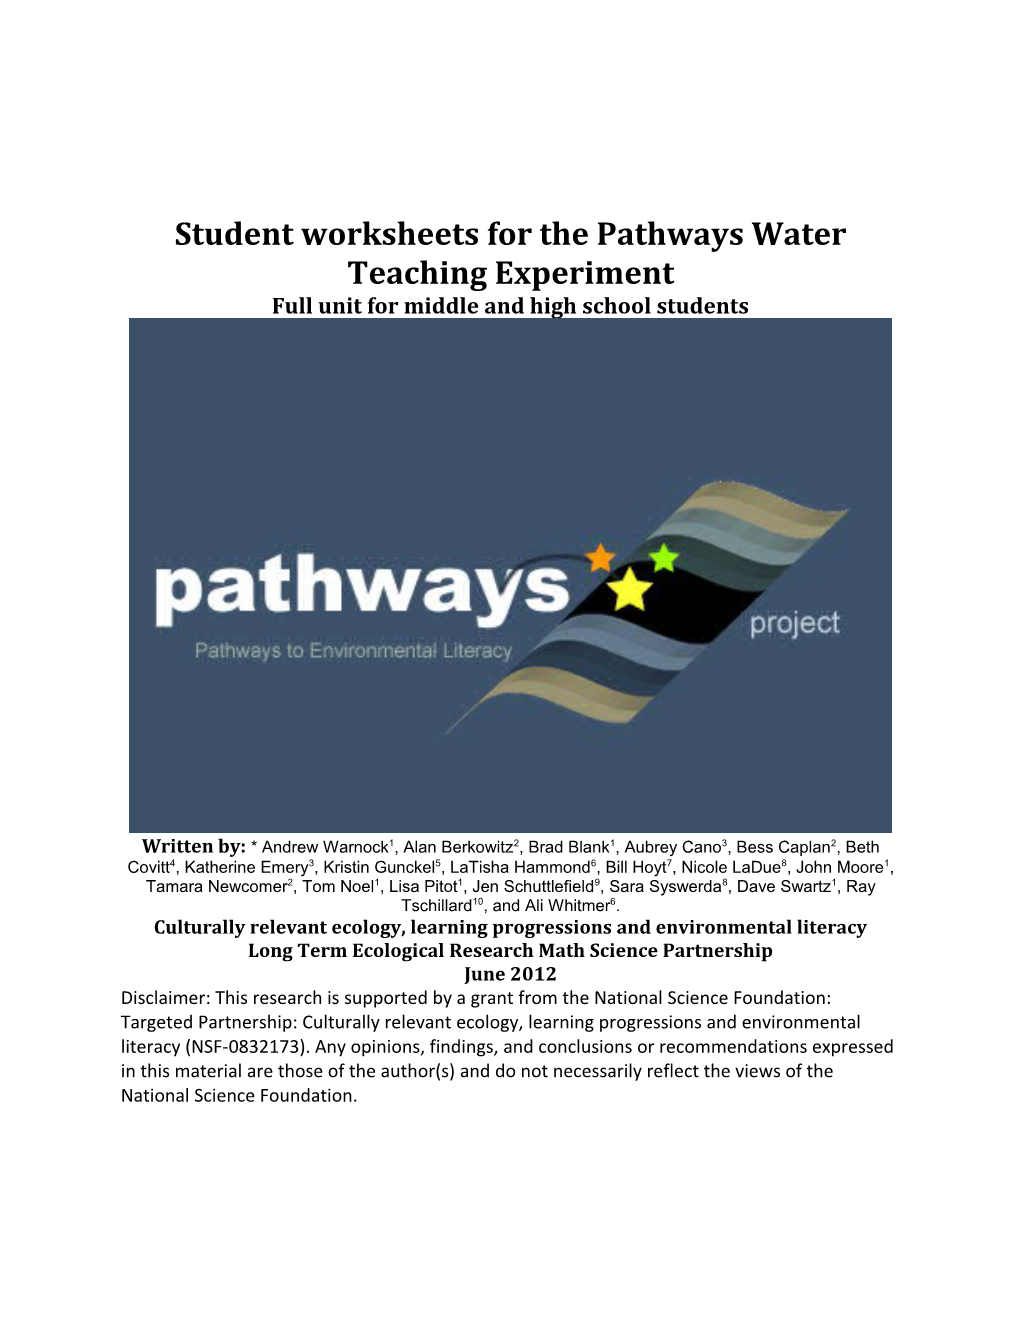 Student Worksheets for the Pathways Water Teaching Experiment